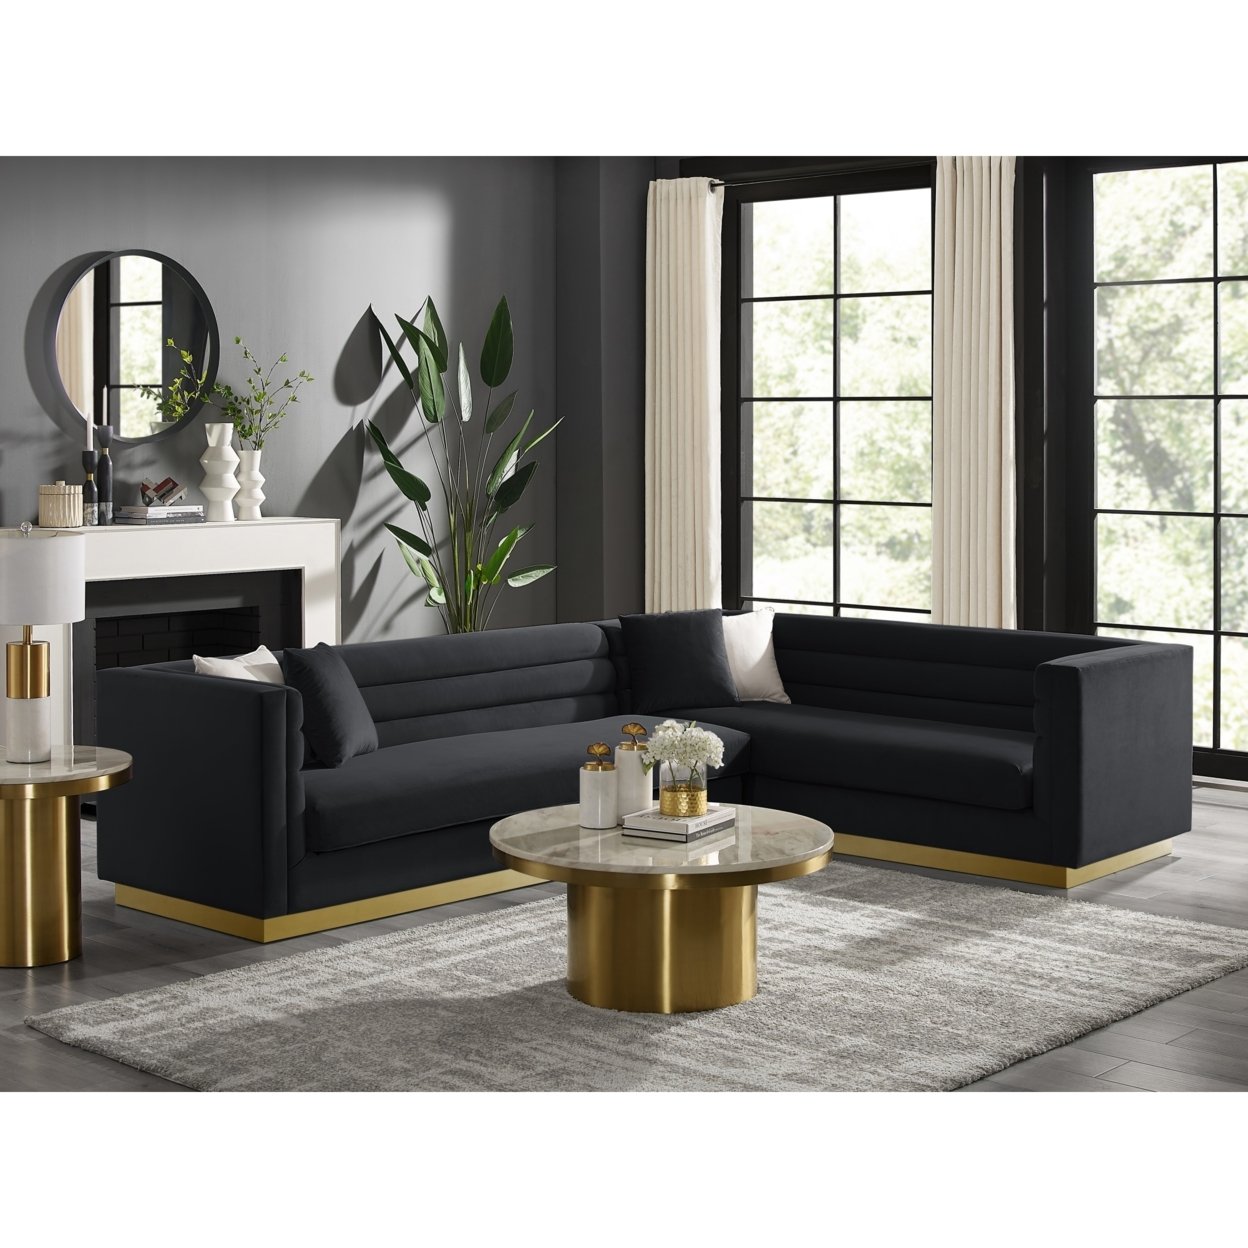 Aja Sofa-Upholstered-Metal Base, Sectional-Square Arms-Horizontal Channel Tufting - black